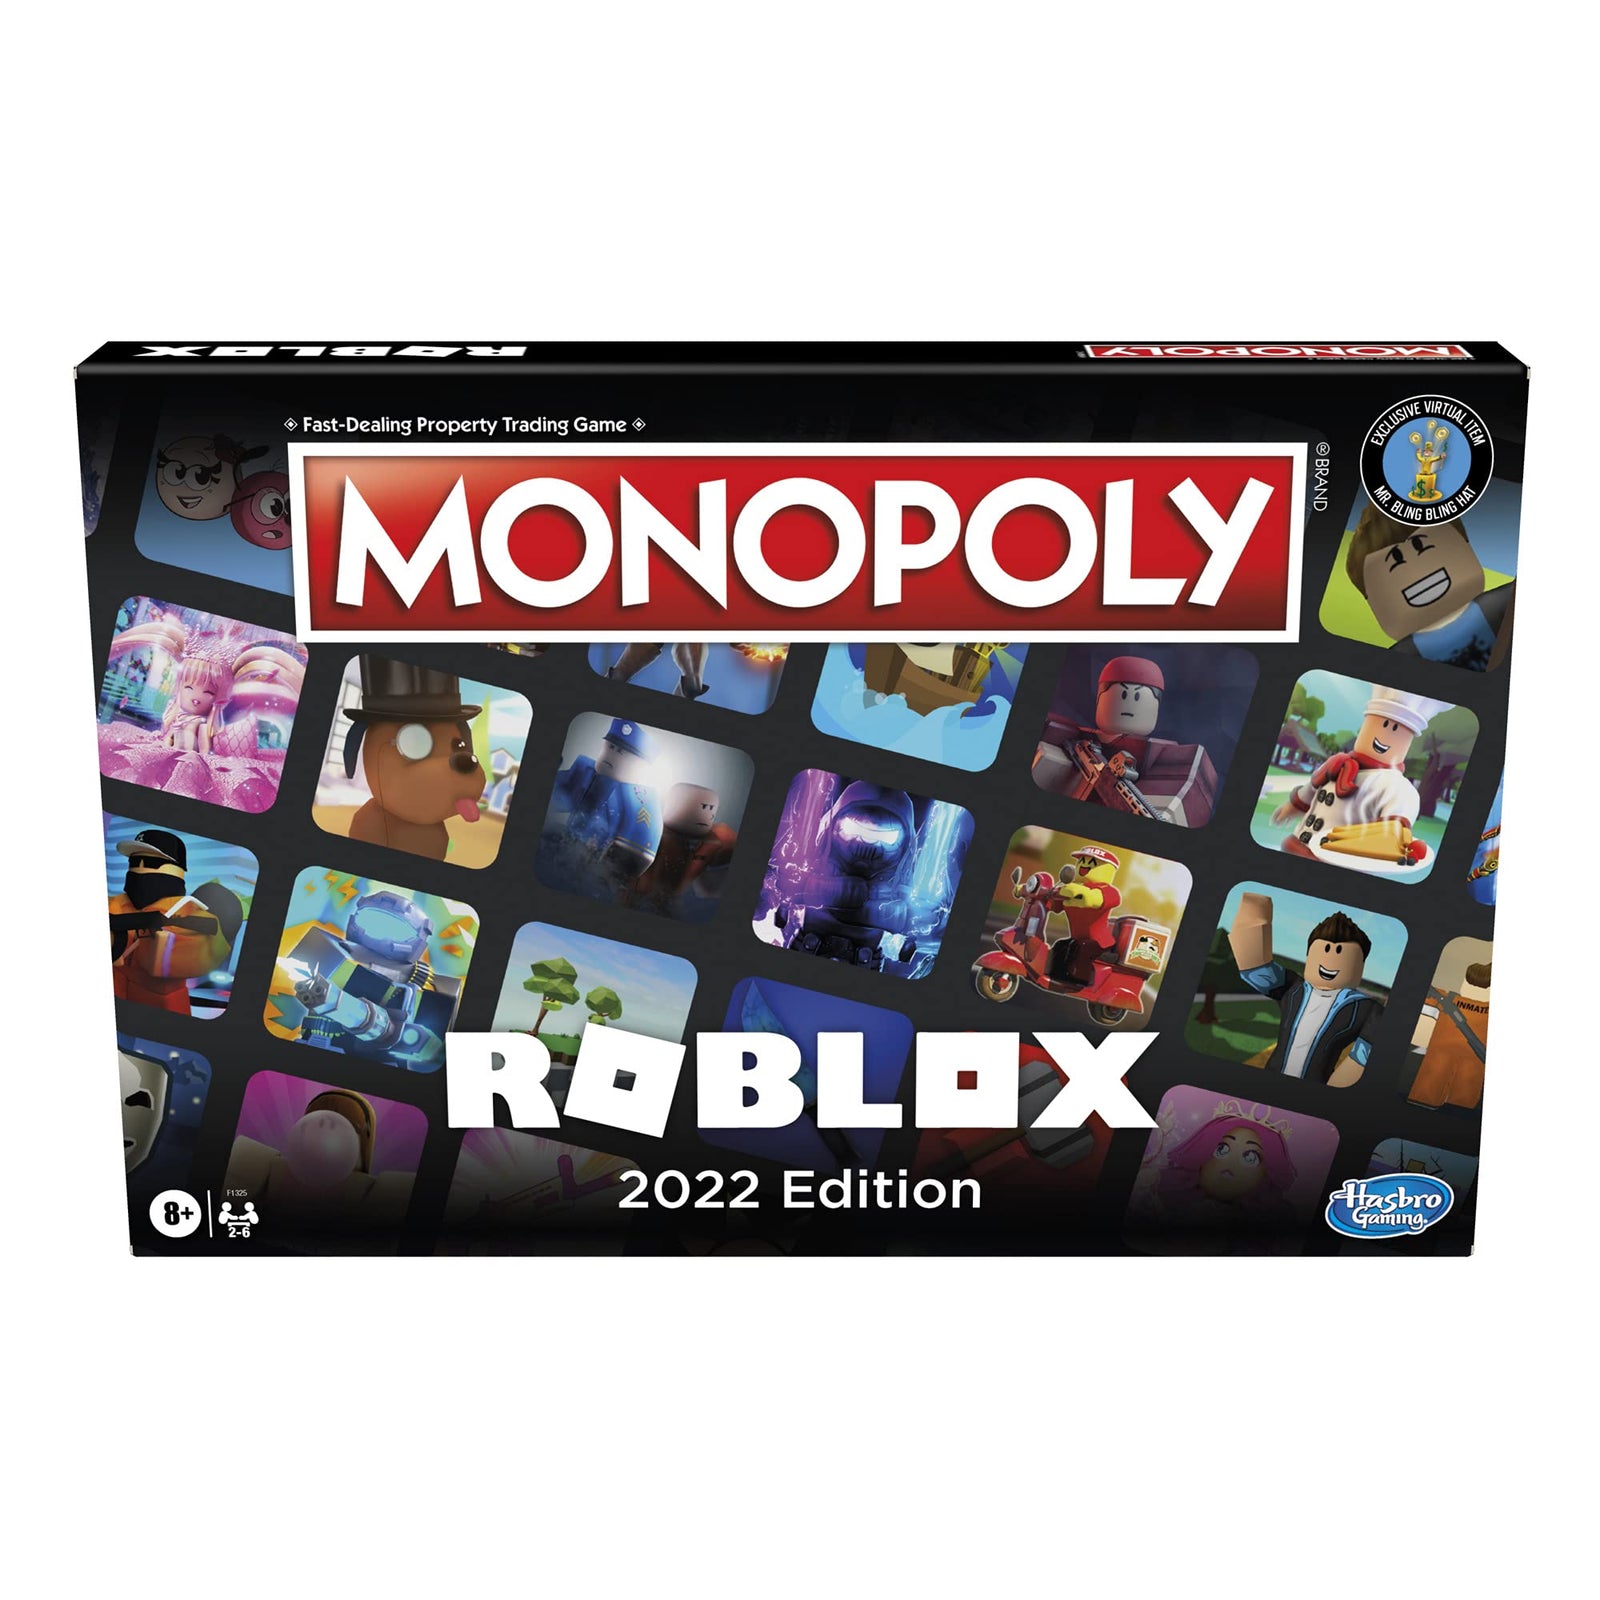 Hasbro Gaming Monopoly: Roblox 2022 Edition Game, Monopoly Board Game Collect and Trade Popular Roblox Experiences